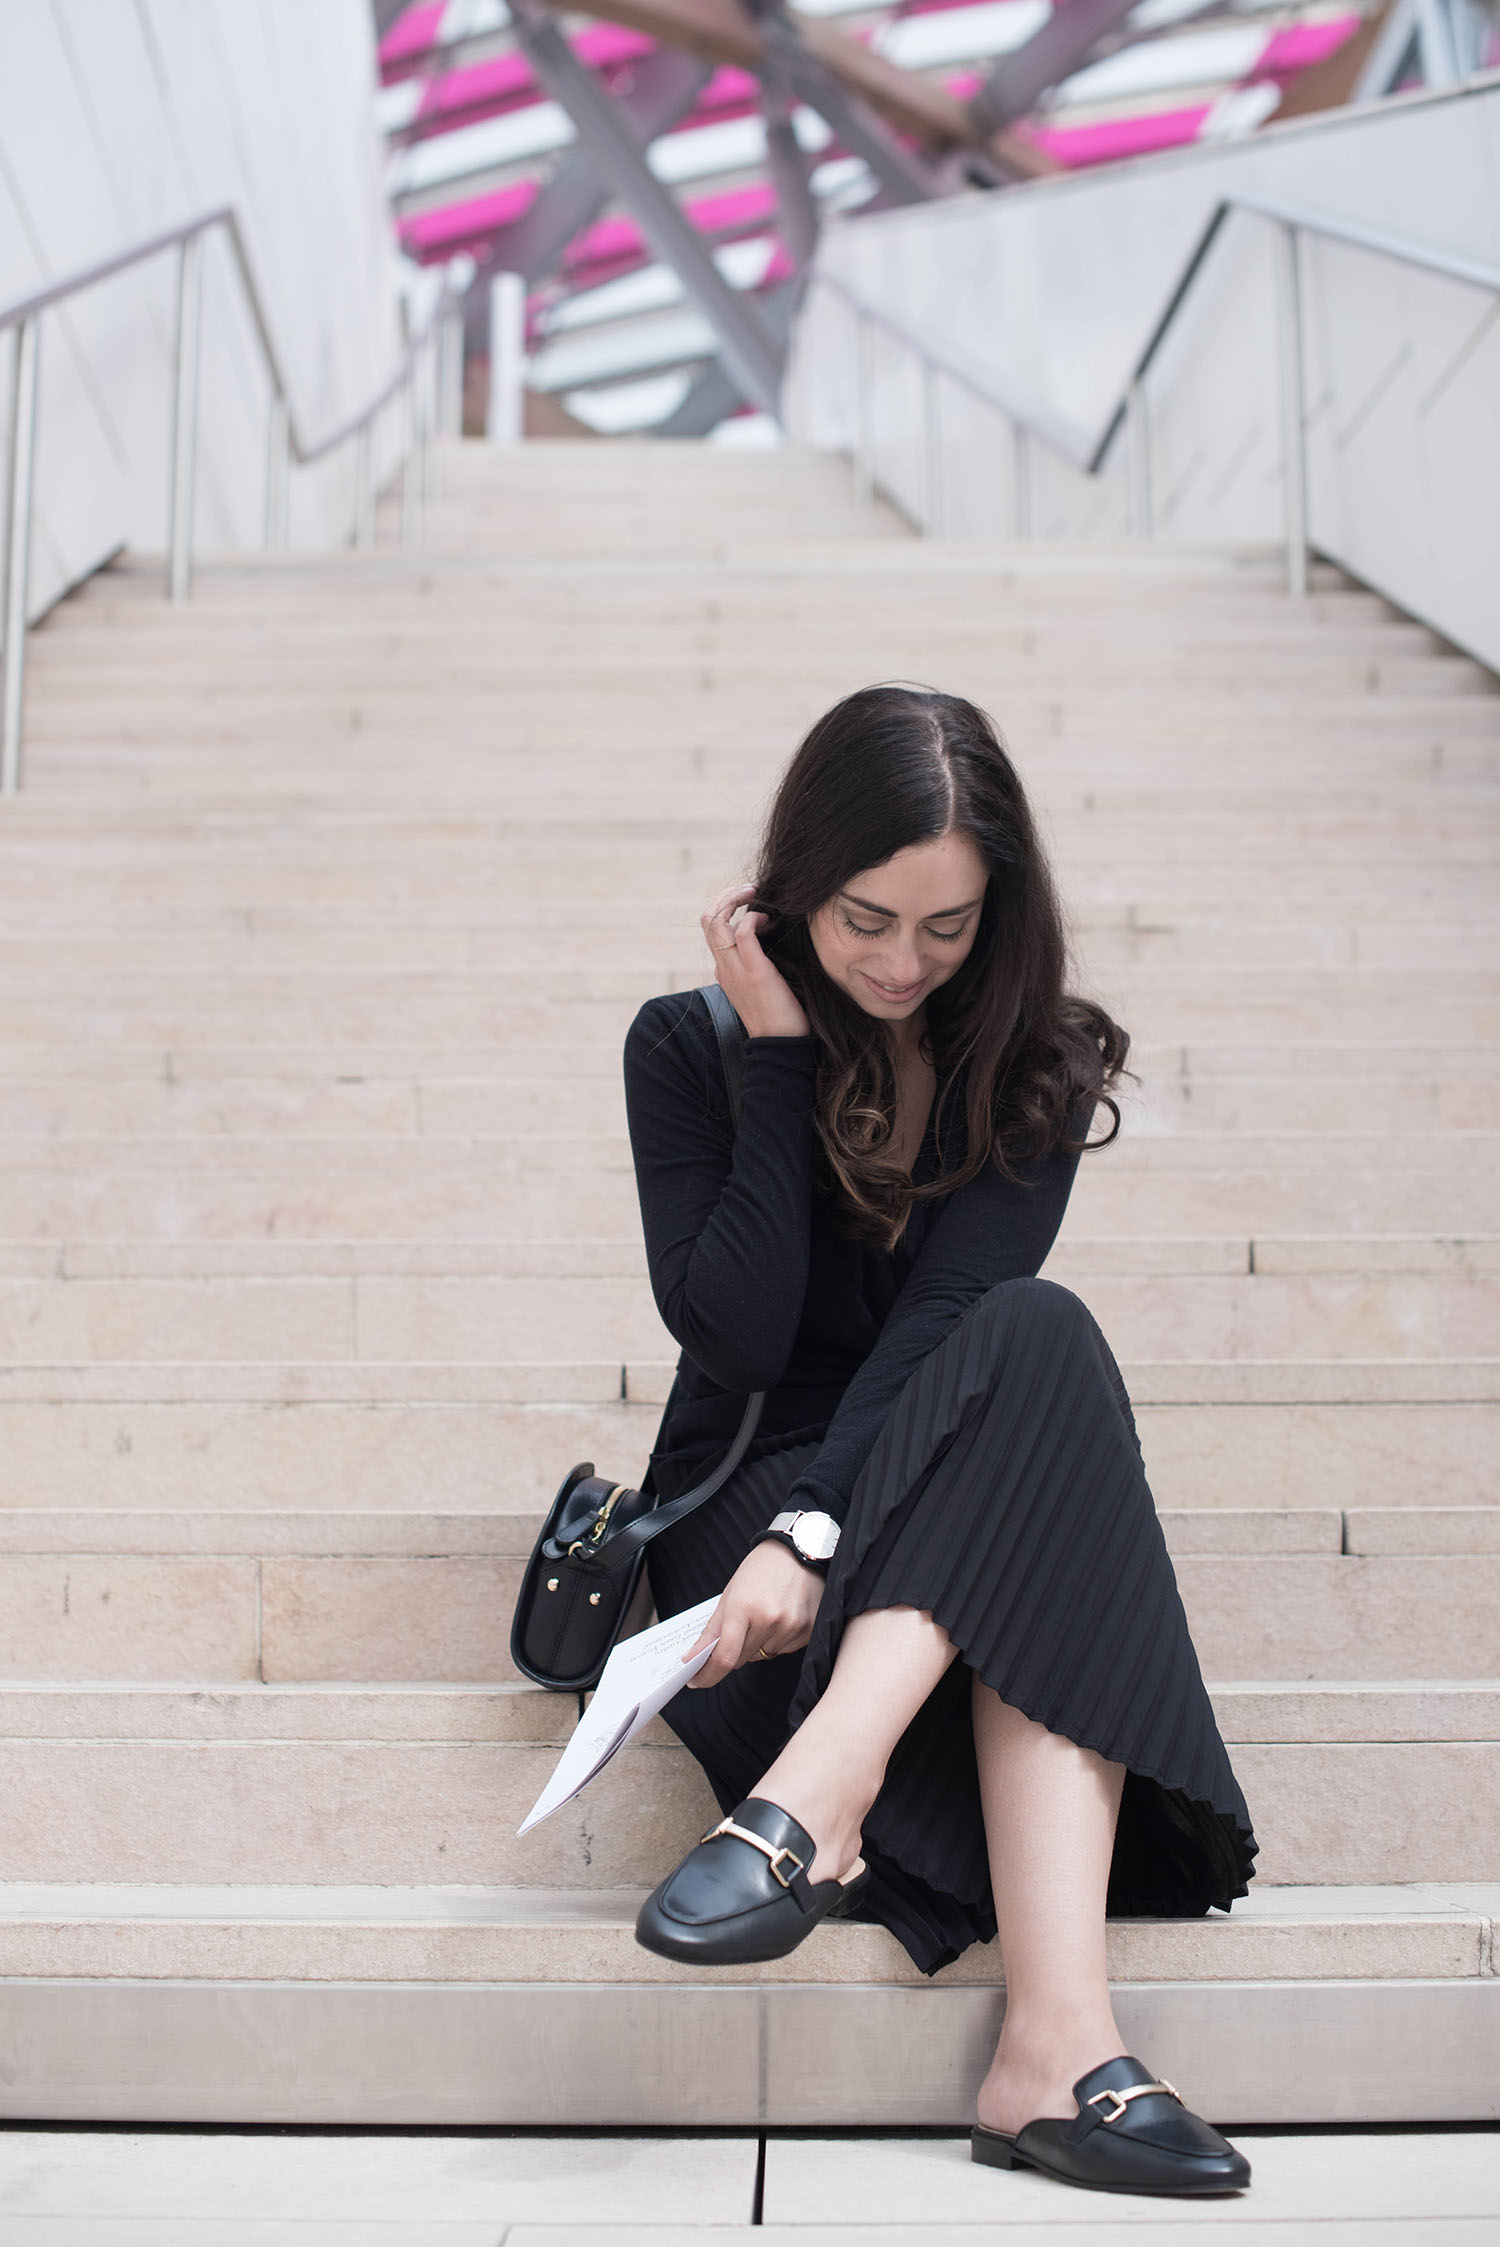 Fashion blogger Cee Fardoe of Coco & Vera sits on the stairs at the Fondation Louis Vuitton wearing an Aritzia pleated skirt and Jonak mules